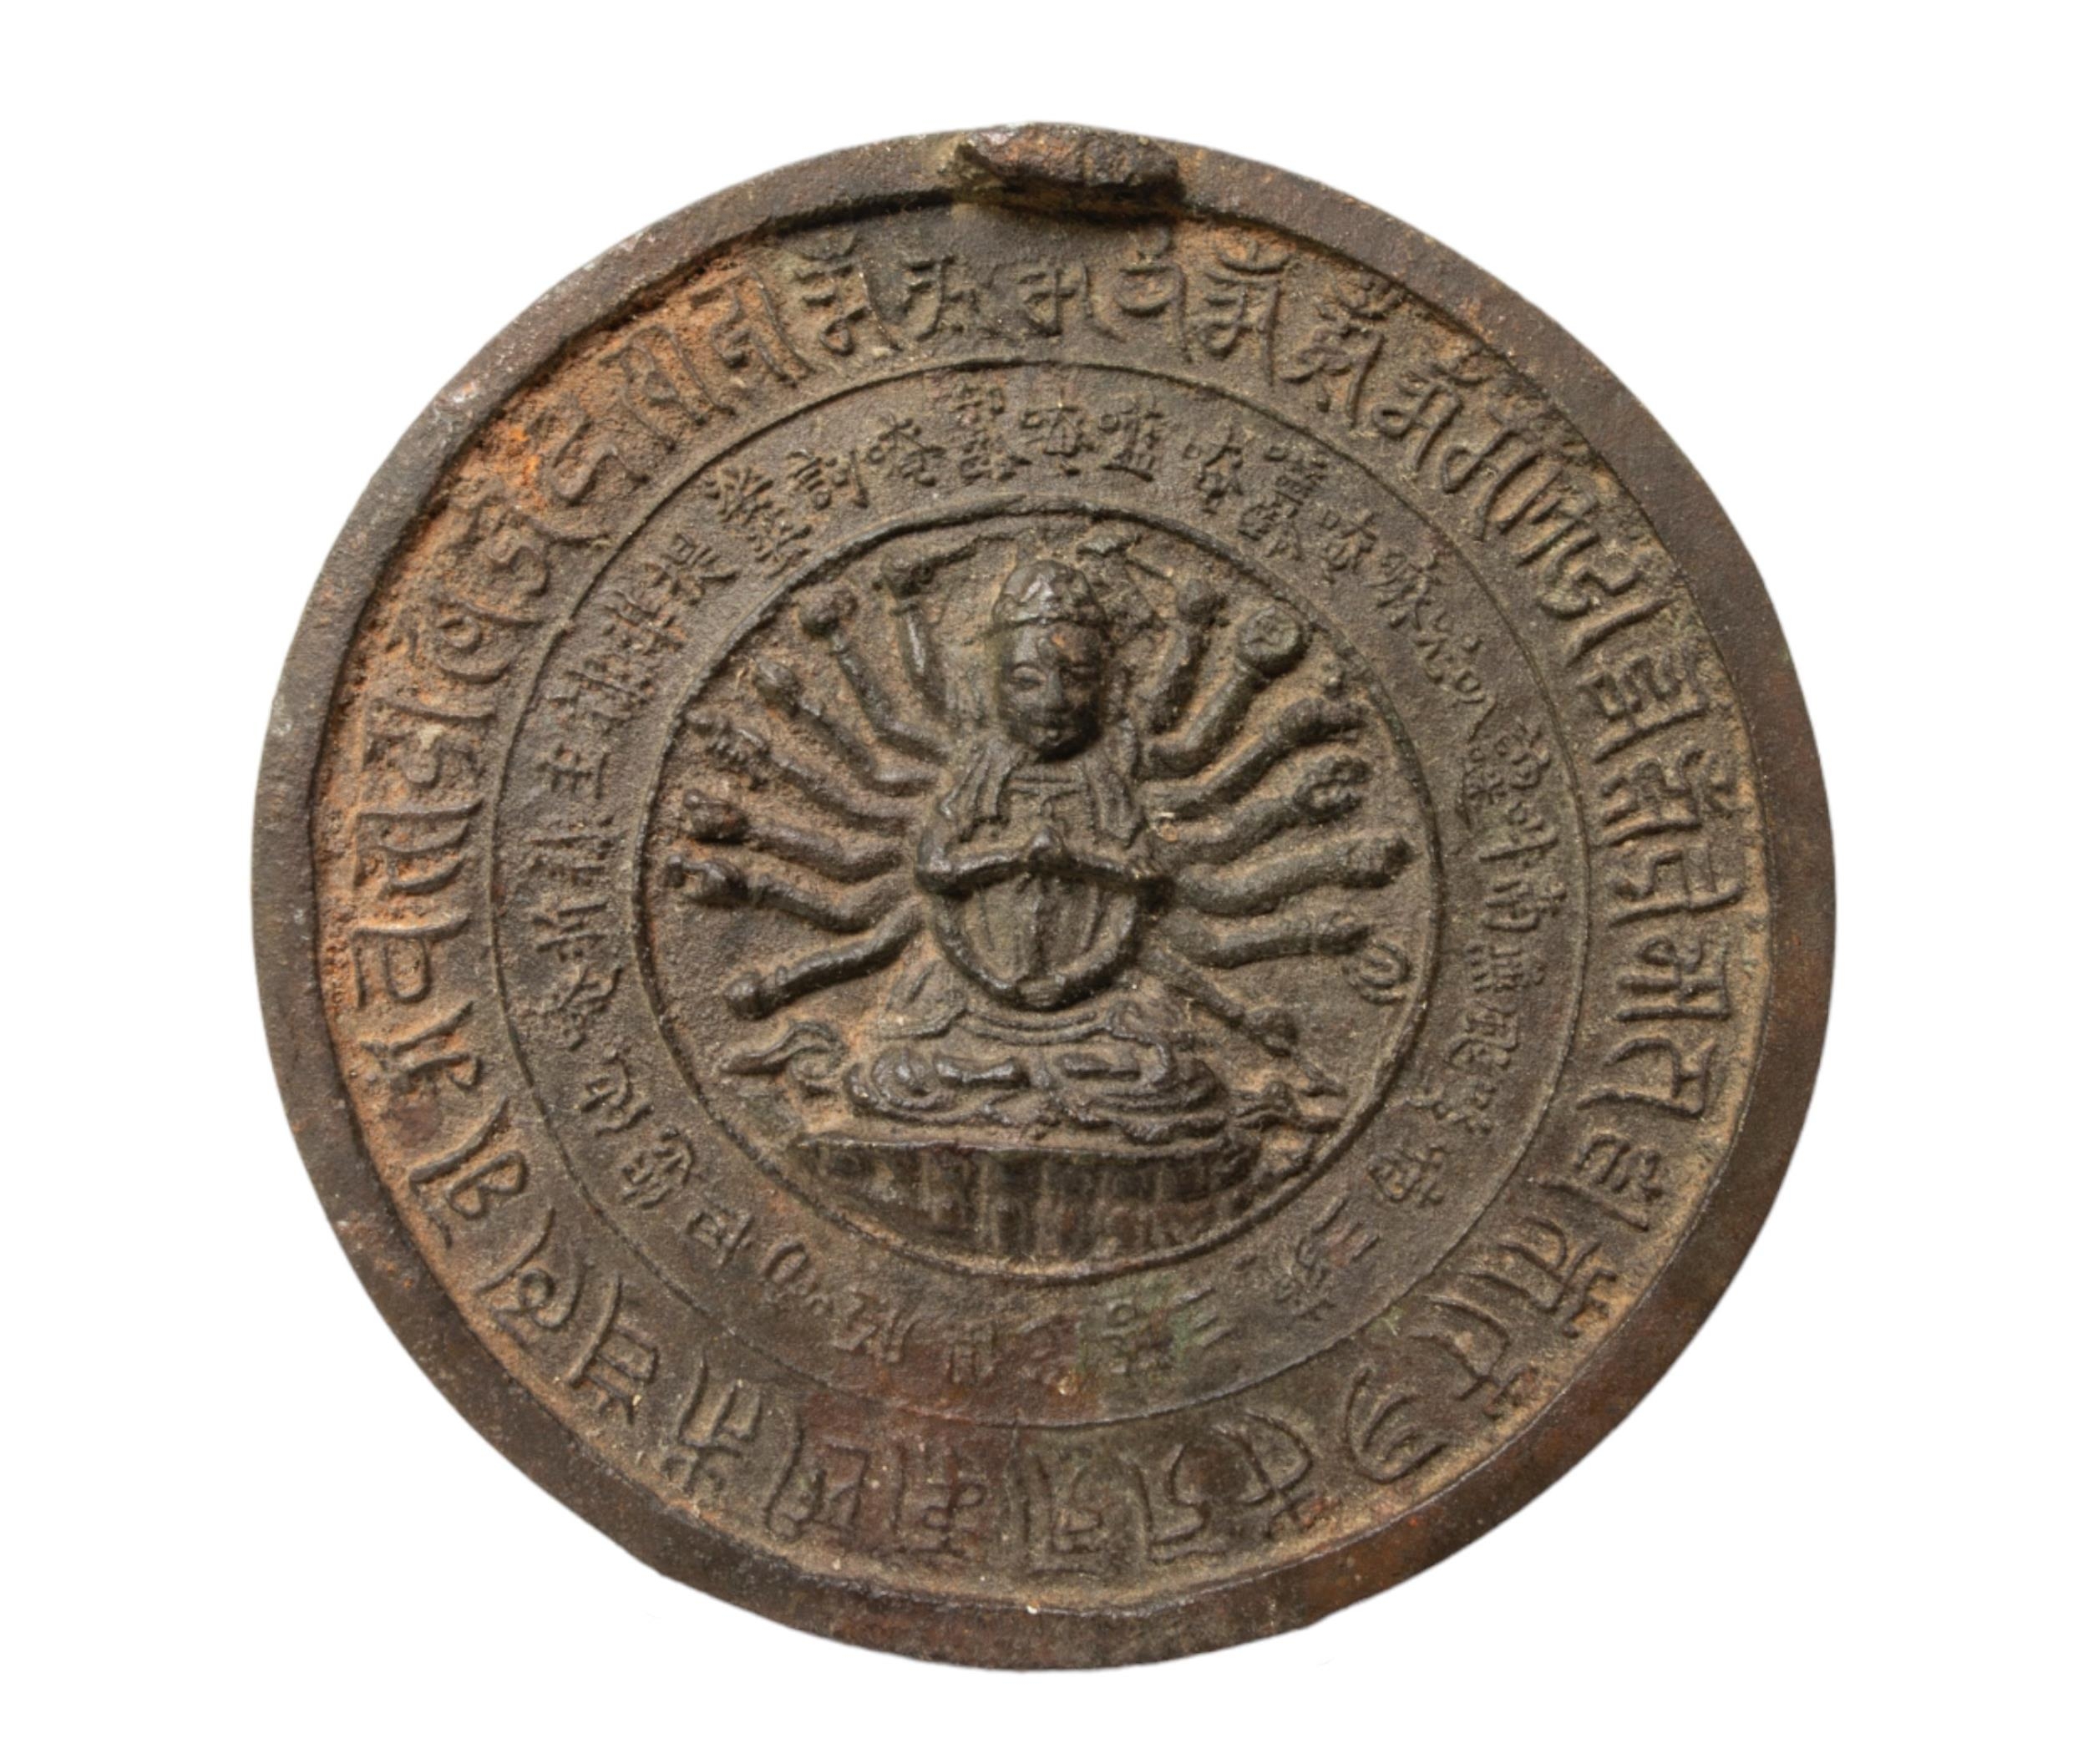 A SINO-TIBETAN BRONZE MIRROR OF AMOGHAPSA, finely cast in relief with the deity in the central